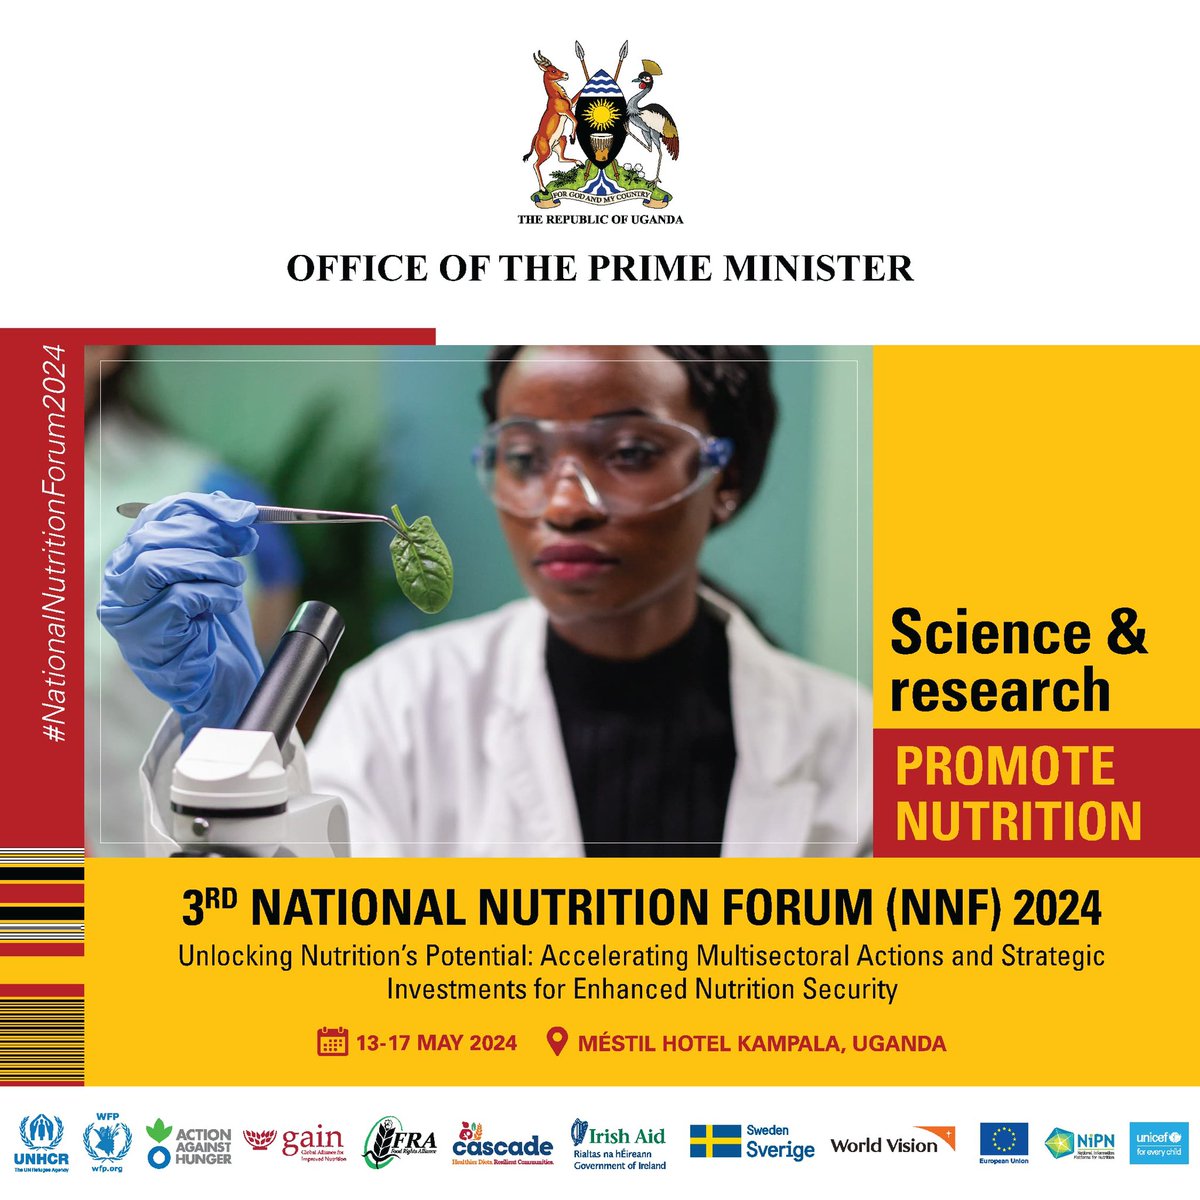 Uganda's Third National Development Plan emphasizes investments in population, health, nutrition, early childhood development, sanitation, hygiene, and basic education for resilience and human capital development. @UNICEFUganda #NationalNutritionForum2024